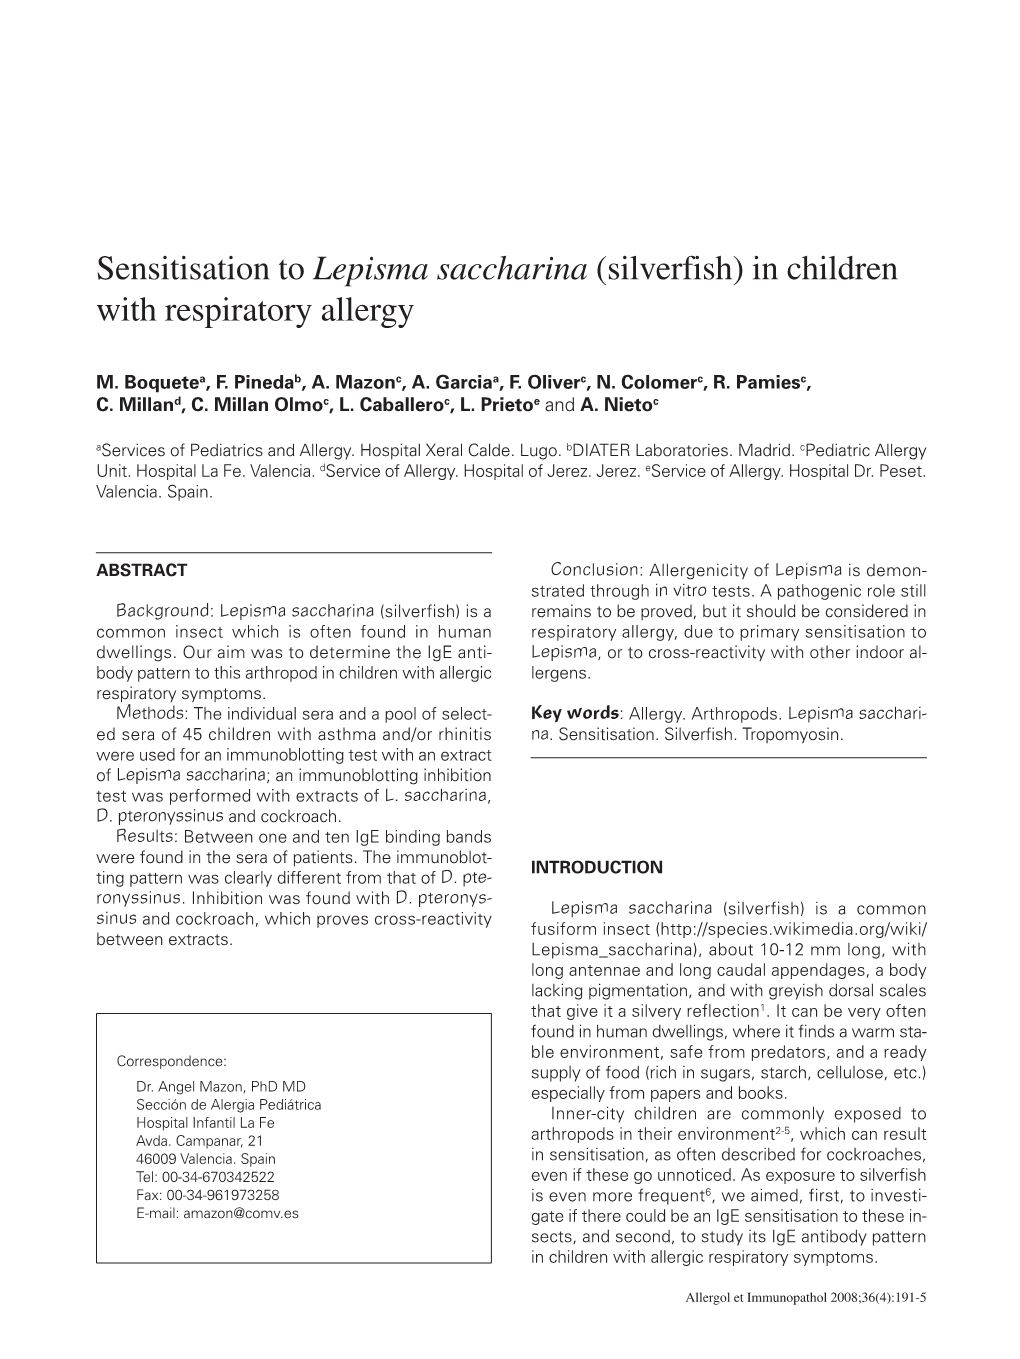 Lepisma Saccharina (Silverfish) in Children with Respiratory Allergy